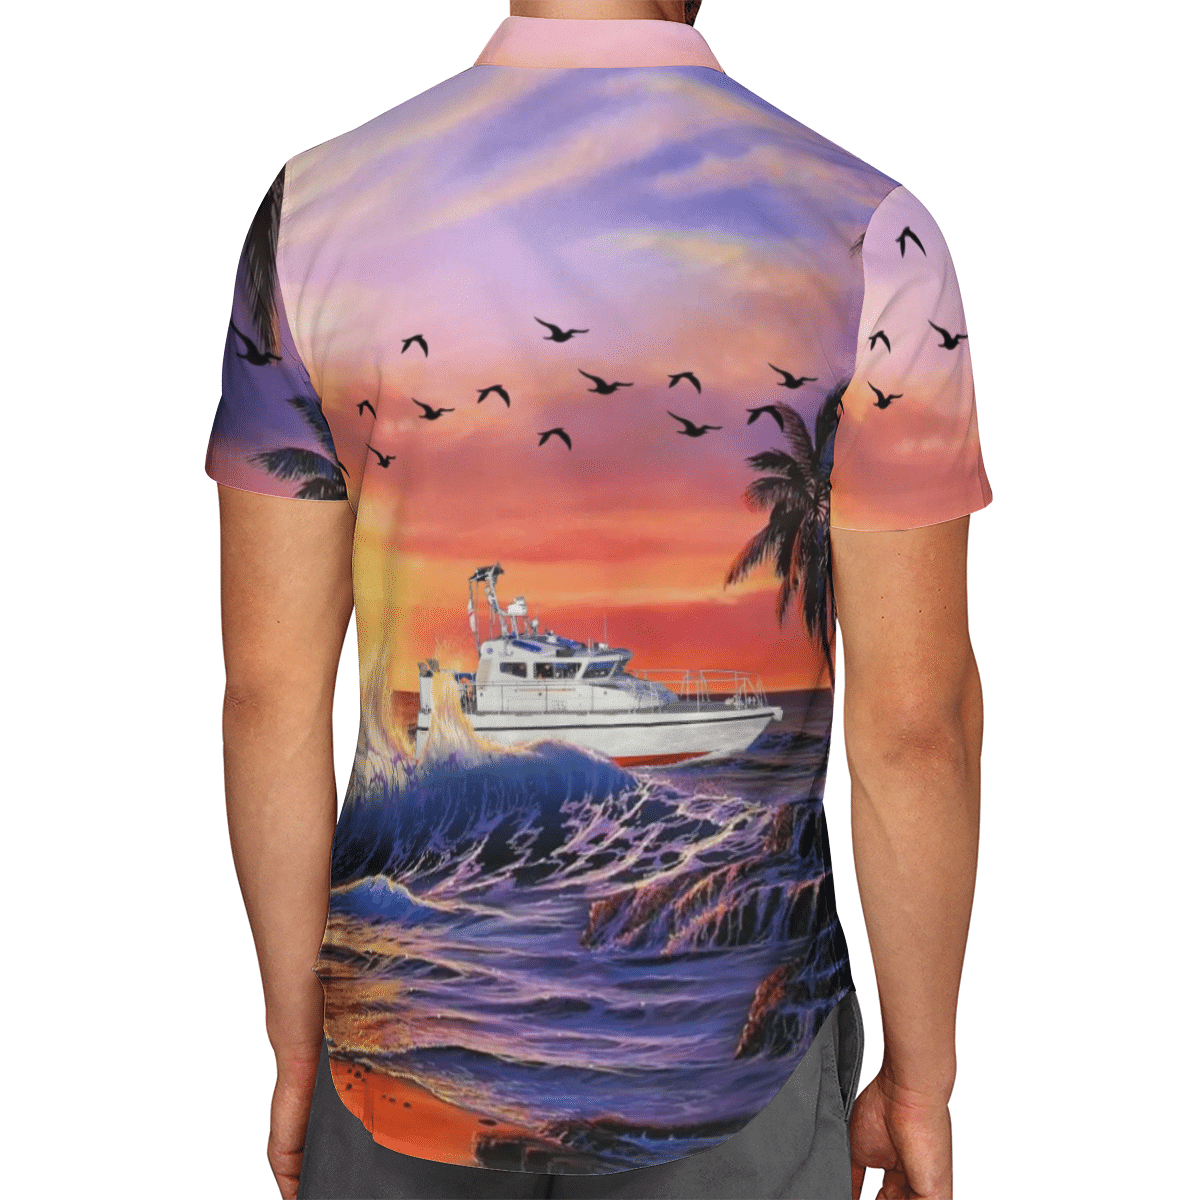 Going to the beach with a quality shirt 163